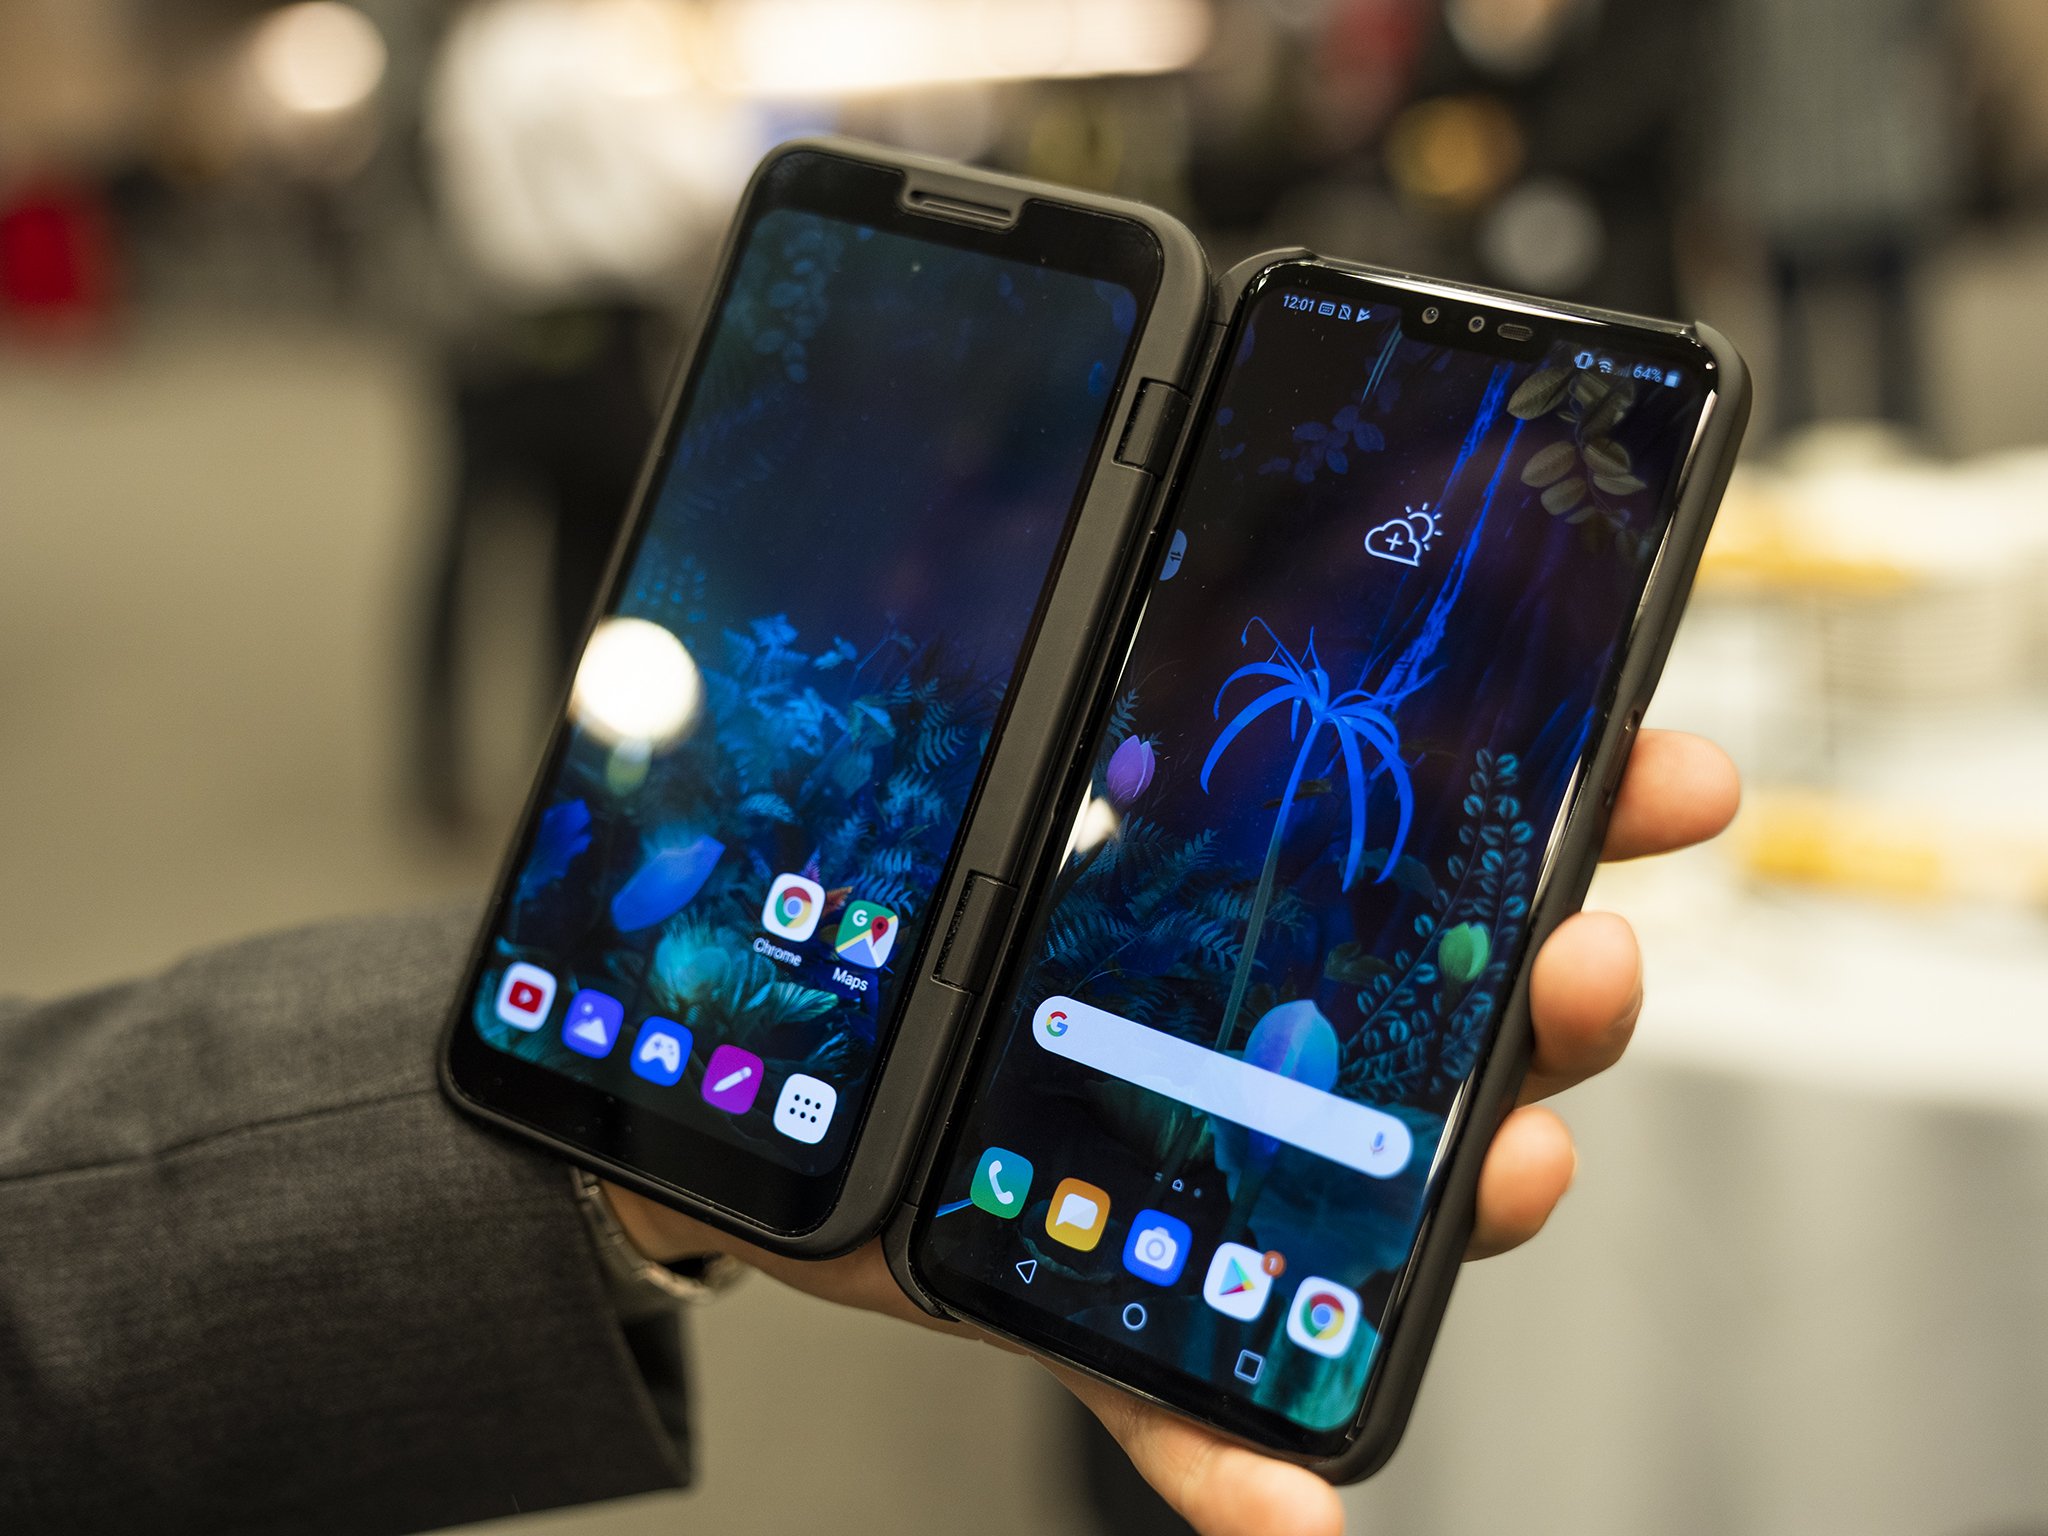 https://www.androidcentral.com/sites/androidcentral.com/files/styles/xlarge_wm_brw/public/article_images/2019/02/lg-v50-dual-view-launcher-mwc-2019.jpg?itok=t2Rzax6e